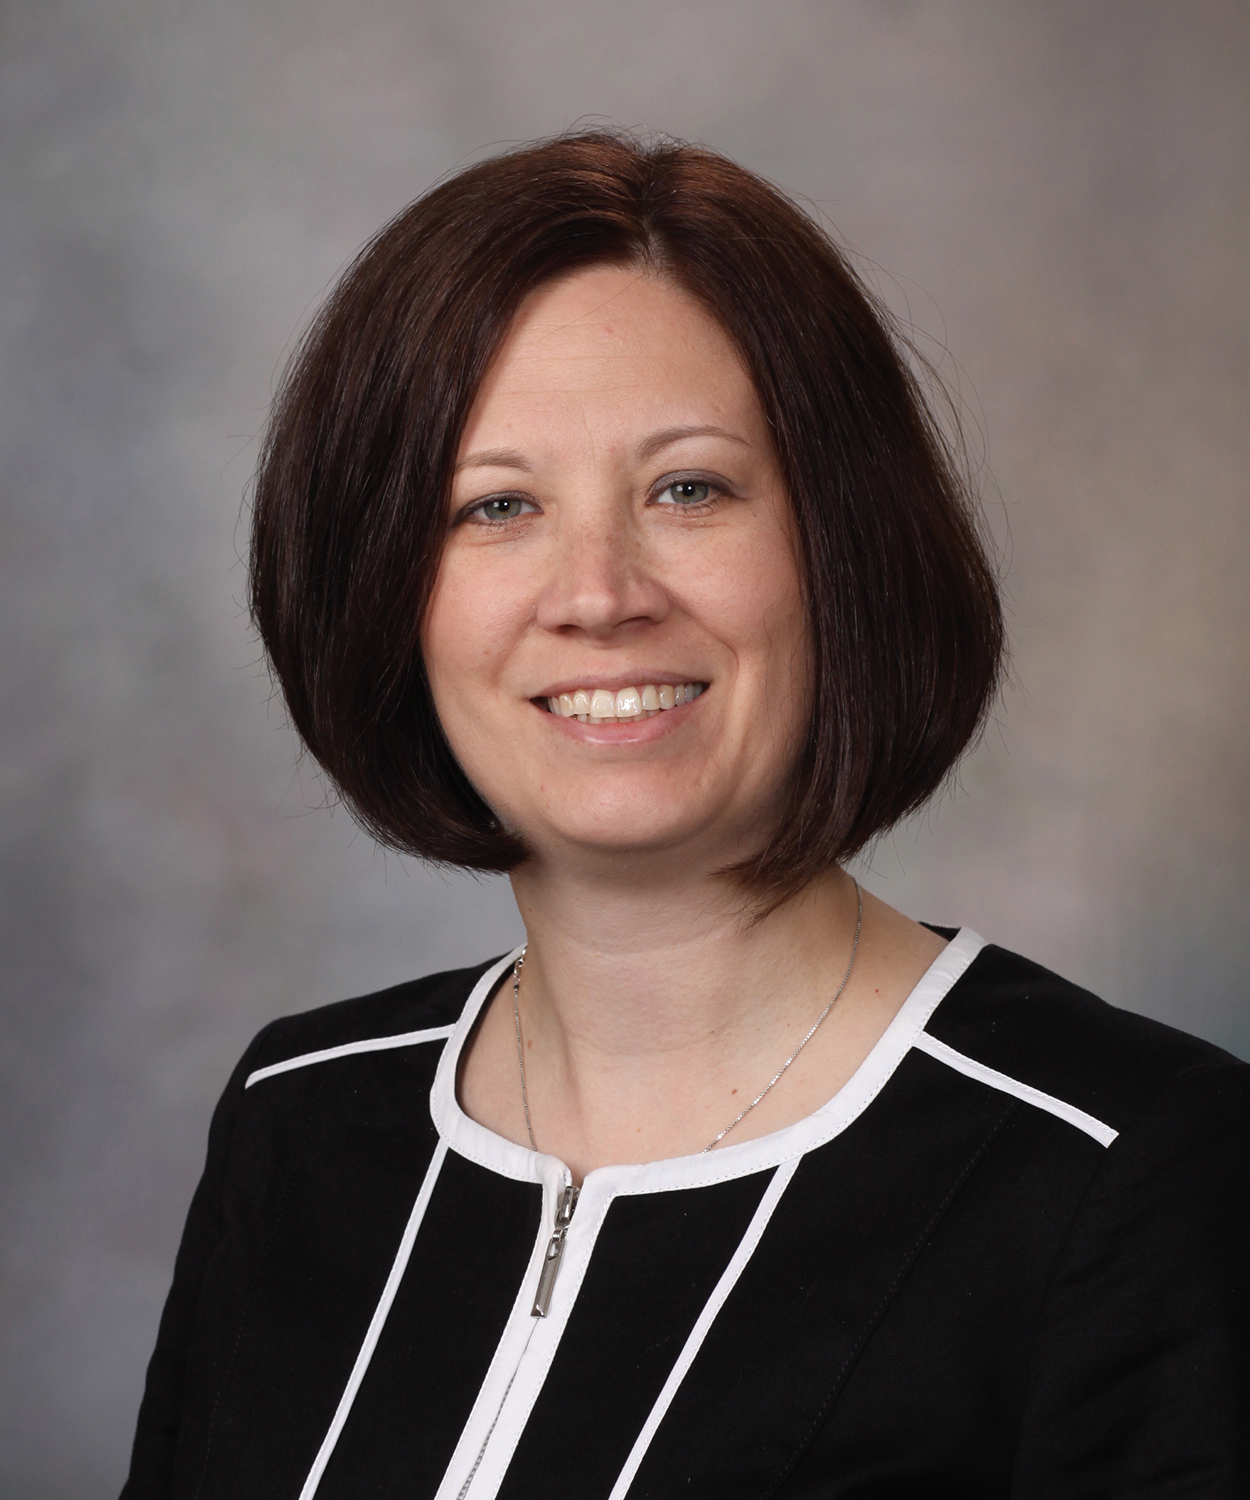 ONS member Lisa Kottschade, MSN, APRN, CNP, nurse practitioner at the Mayo Clinic in Rochester, MN, and member of the Southeast Minnesota ONS Chapter